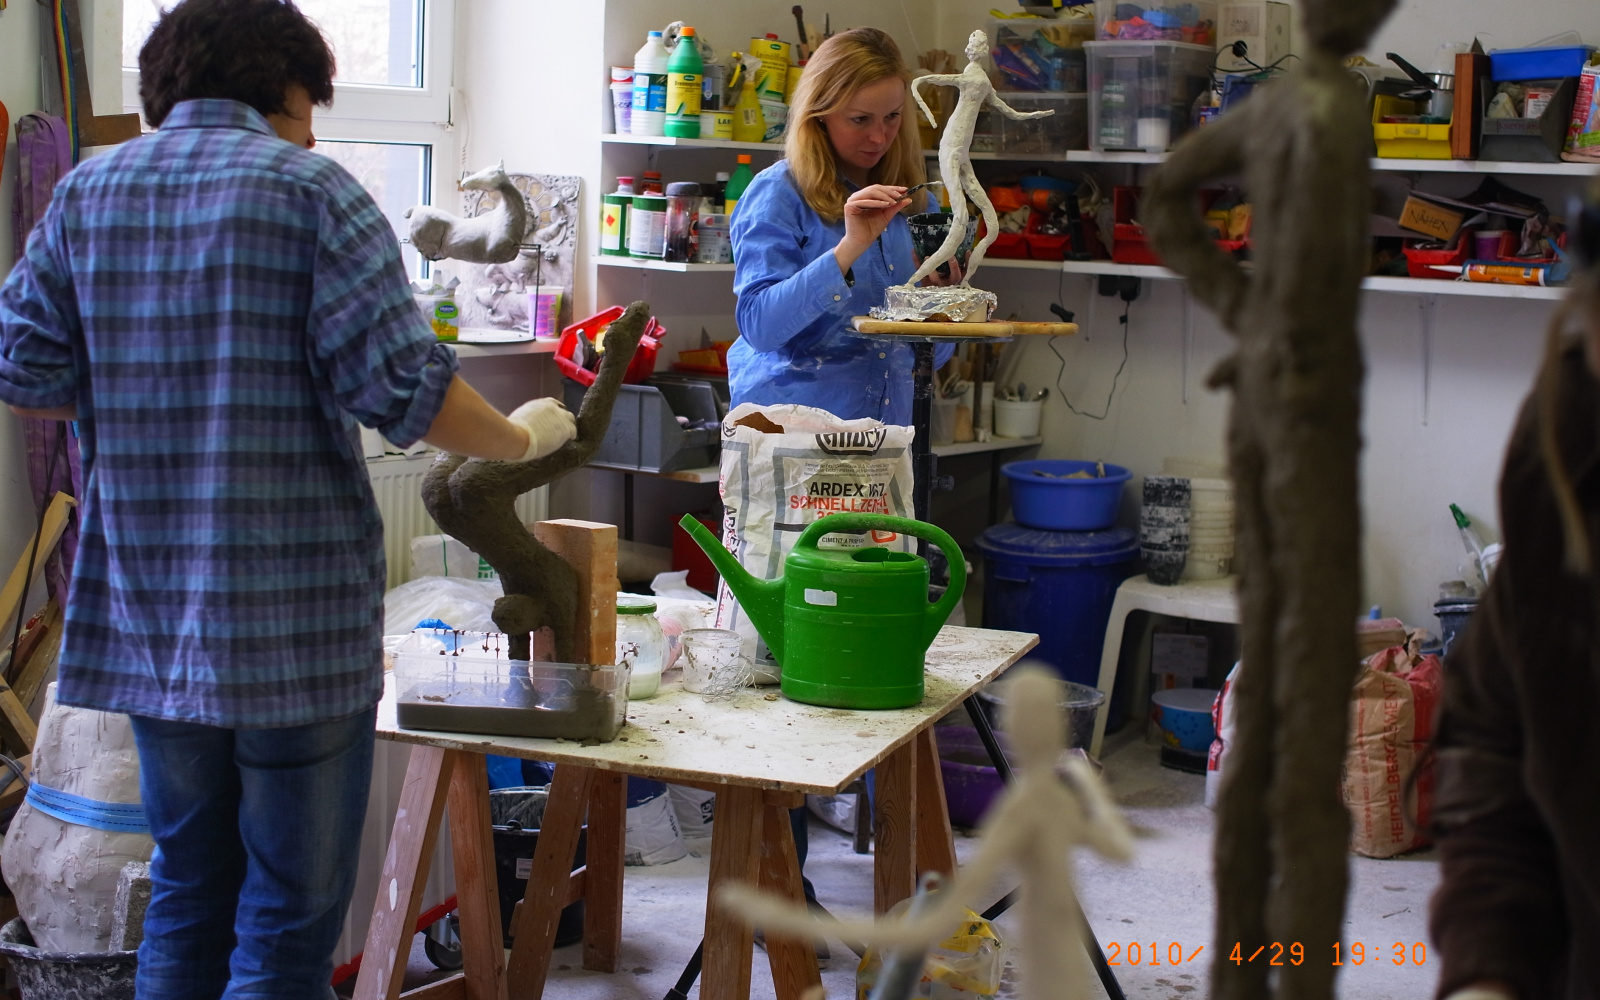 Women in an atelier are workig on slender figurines out of gesso.